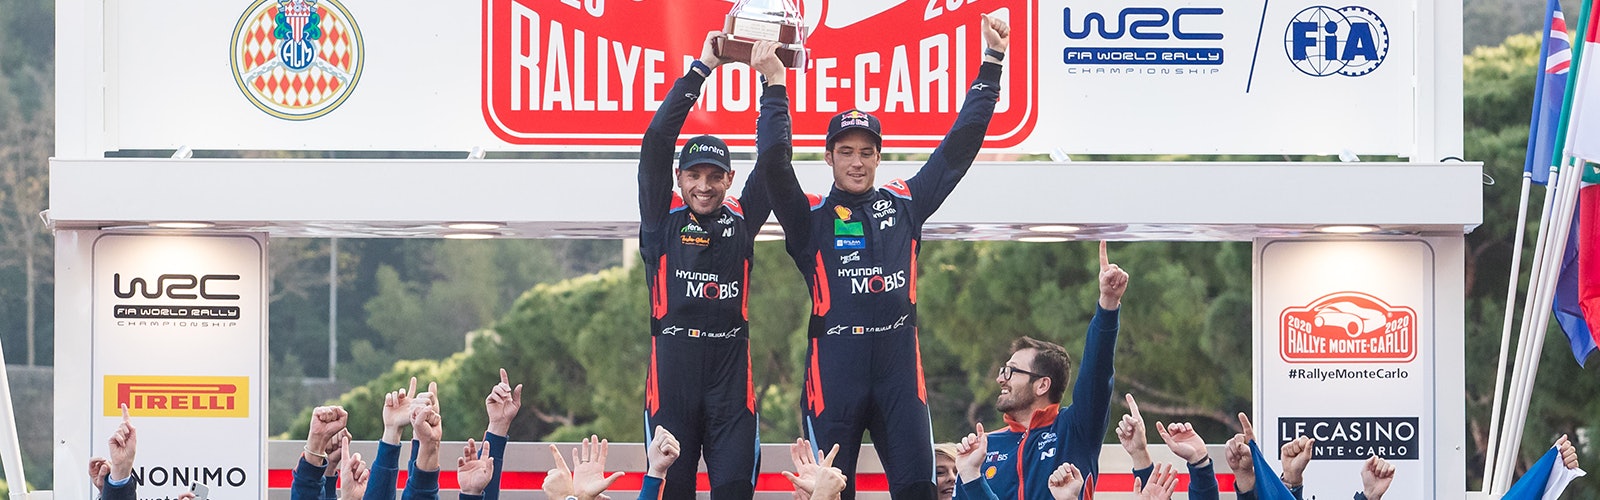 Thierry Neuville wins Monte Carlo